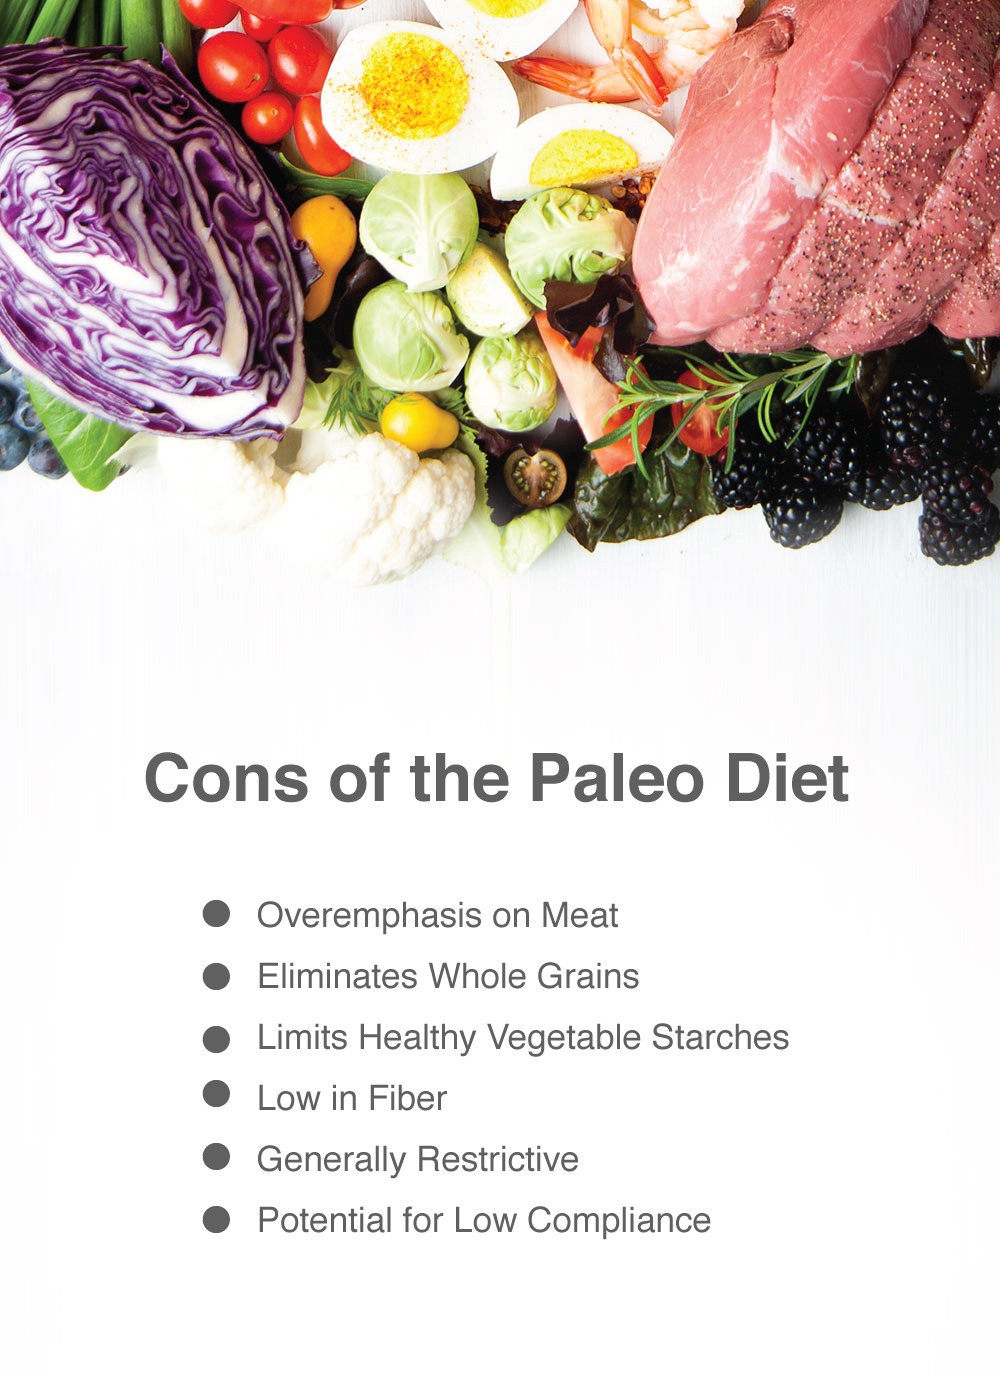 Cons of the Paleo Diet